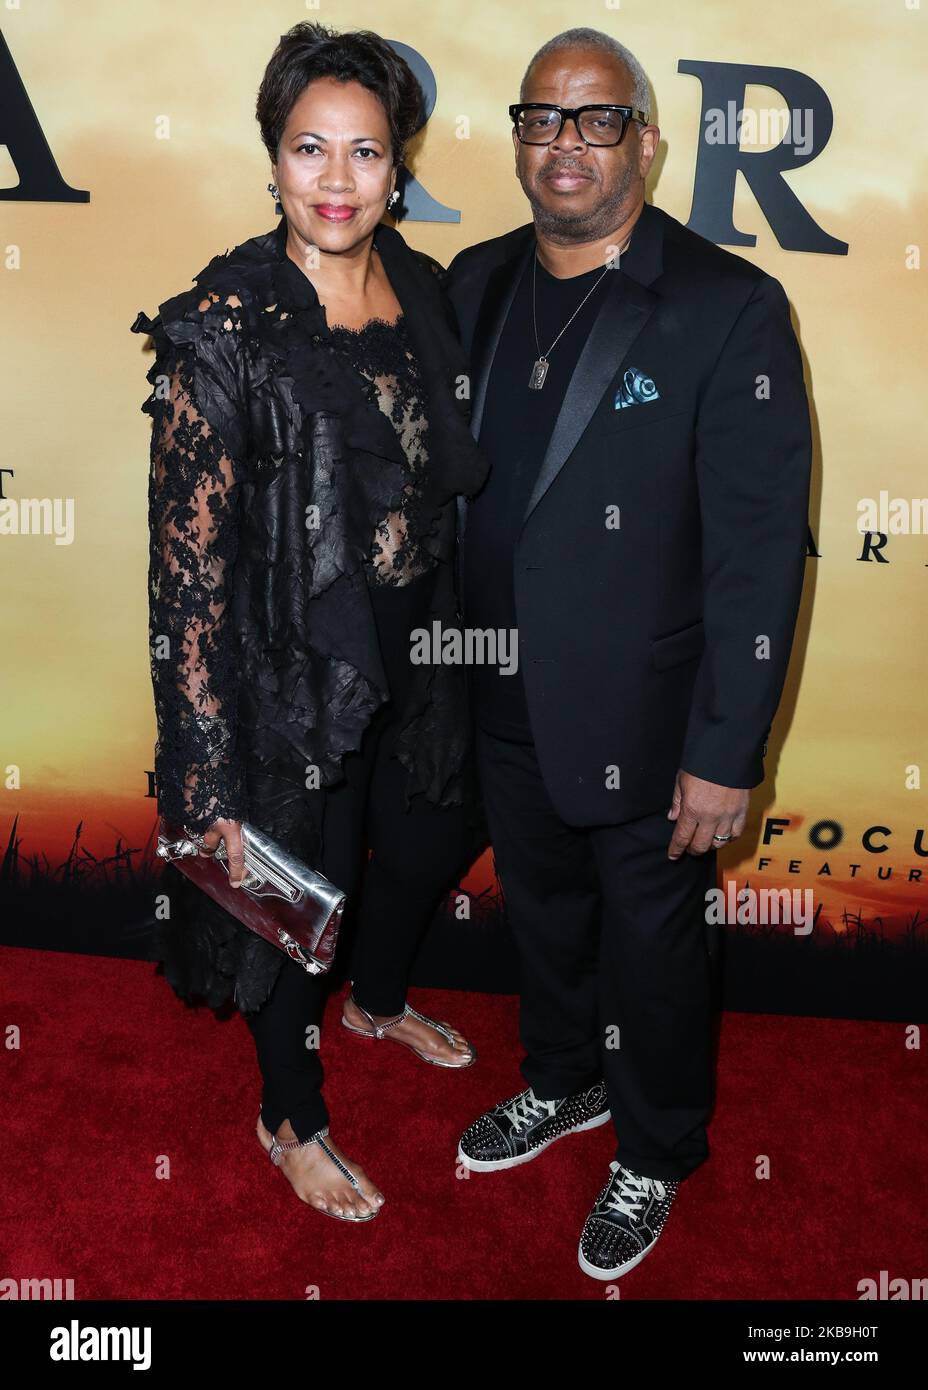 LOS ANGELES, CALIFORNIA, USA - OCTOBER 29: Robin Burgess and Terence Blanchard arrive at the Los Angeles Premiere Of Focus Features' 'Harriet' held at The Orpheum Theatre on October 29, 2019 in Los Angeles, California, United States. (Photo by Xavier Collin/Image Press Agency/NurPhoto) Stock Photo